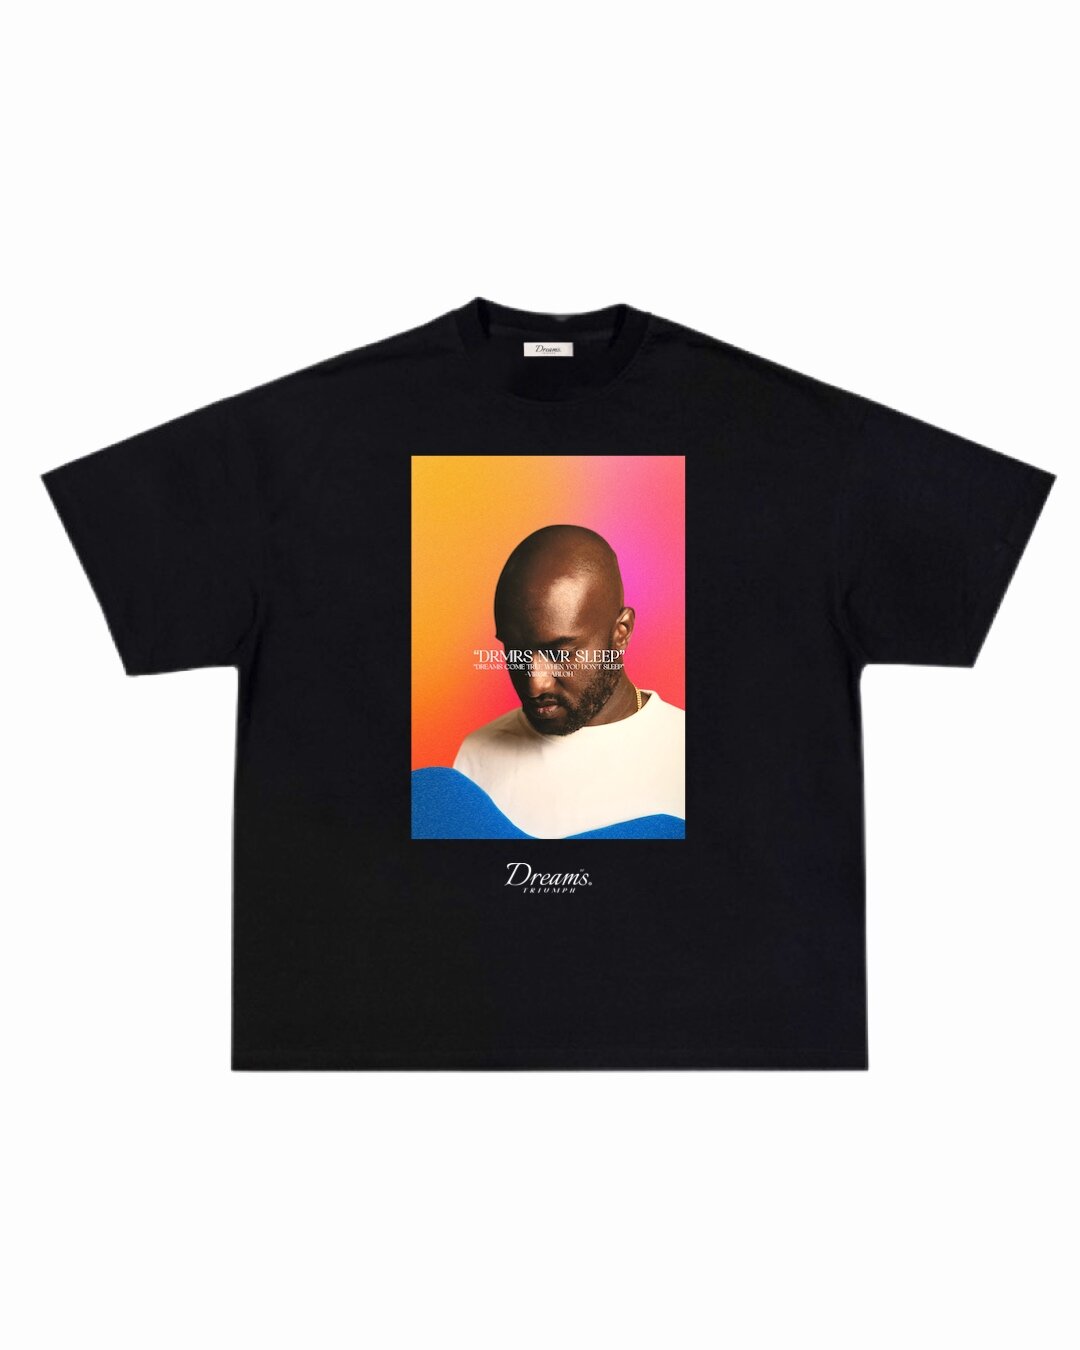 Virgil Forever DRMRS NVR SLEEP BHM Tee — The Dream is Real | T-Shirts